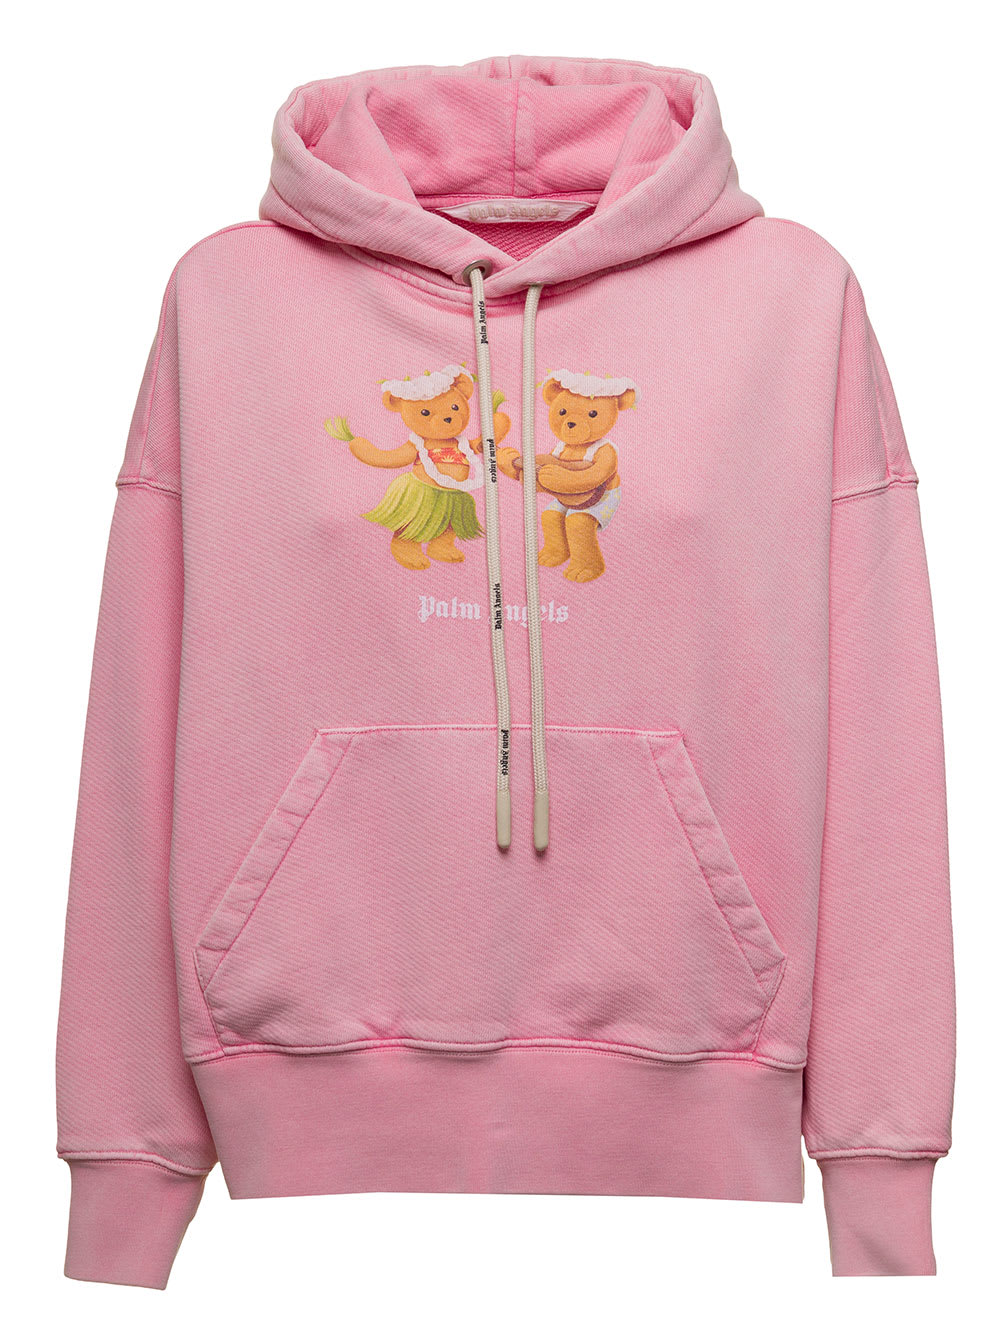 Palm Angels Womans Pink Cotton Hoodie With Bears Print